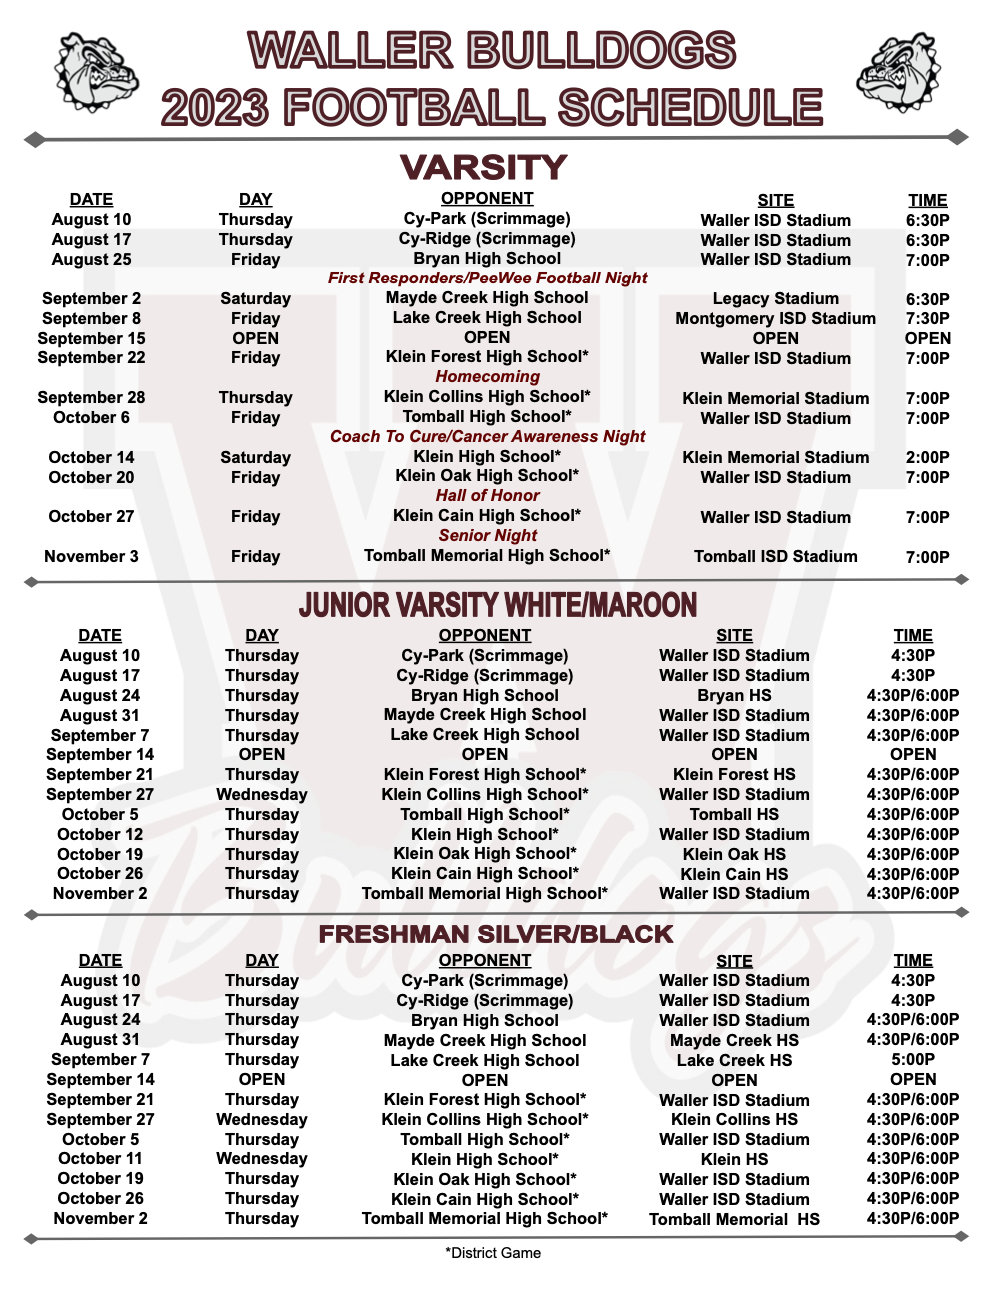 The Waller HIgh School Bulldog schedule in easy to download form. (courtesy Waller ISD)